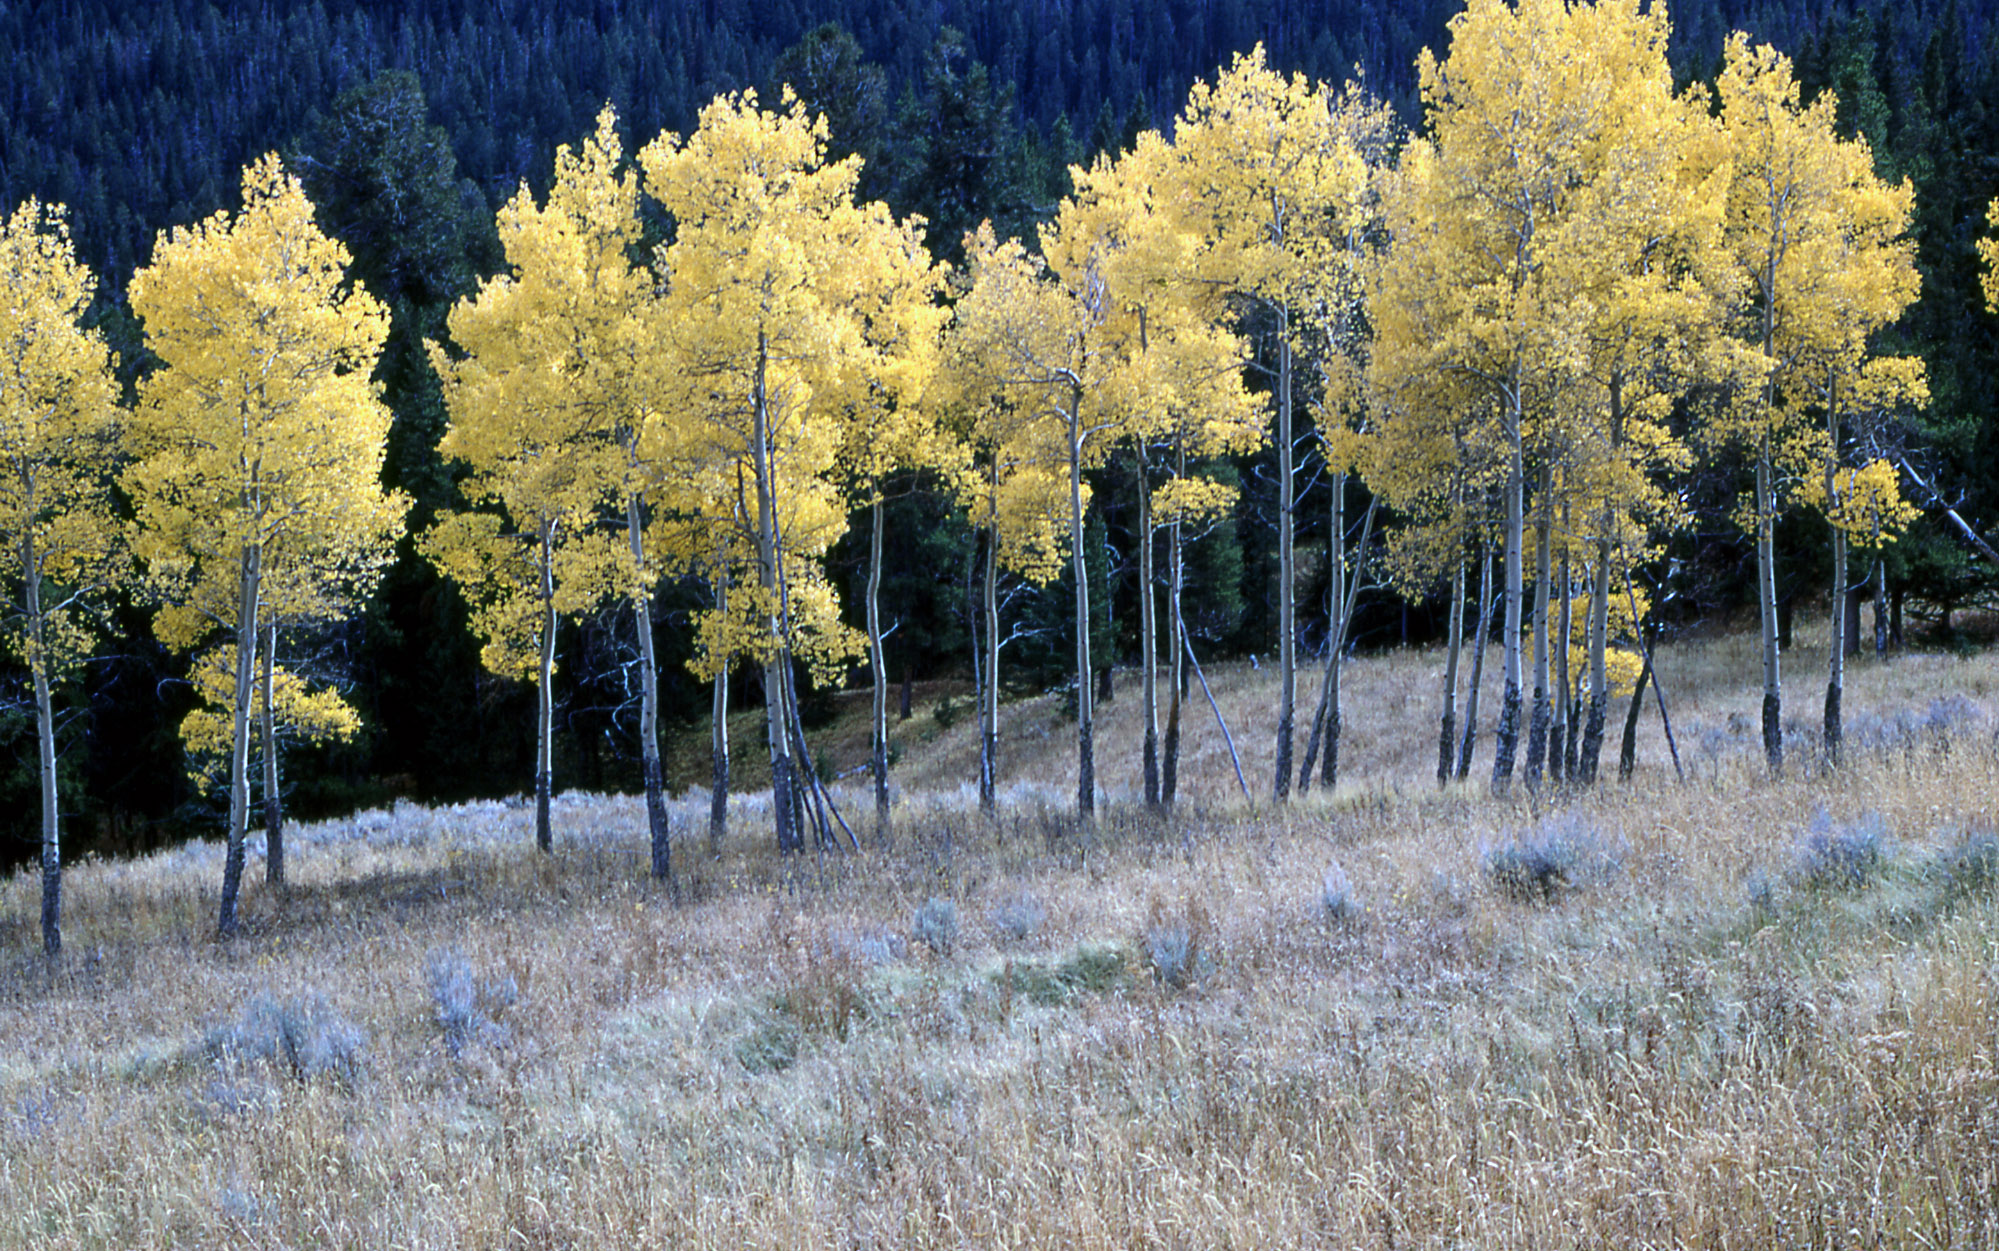 Aspen trees in Lava Beds NM